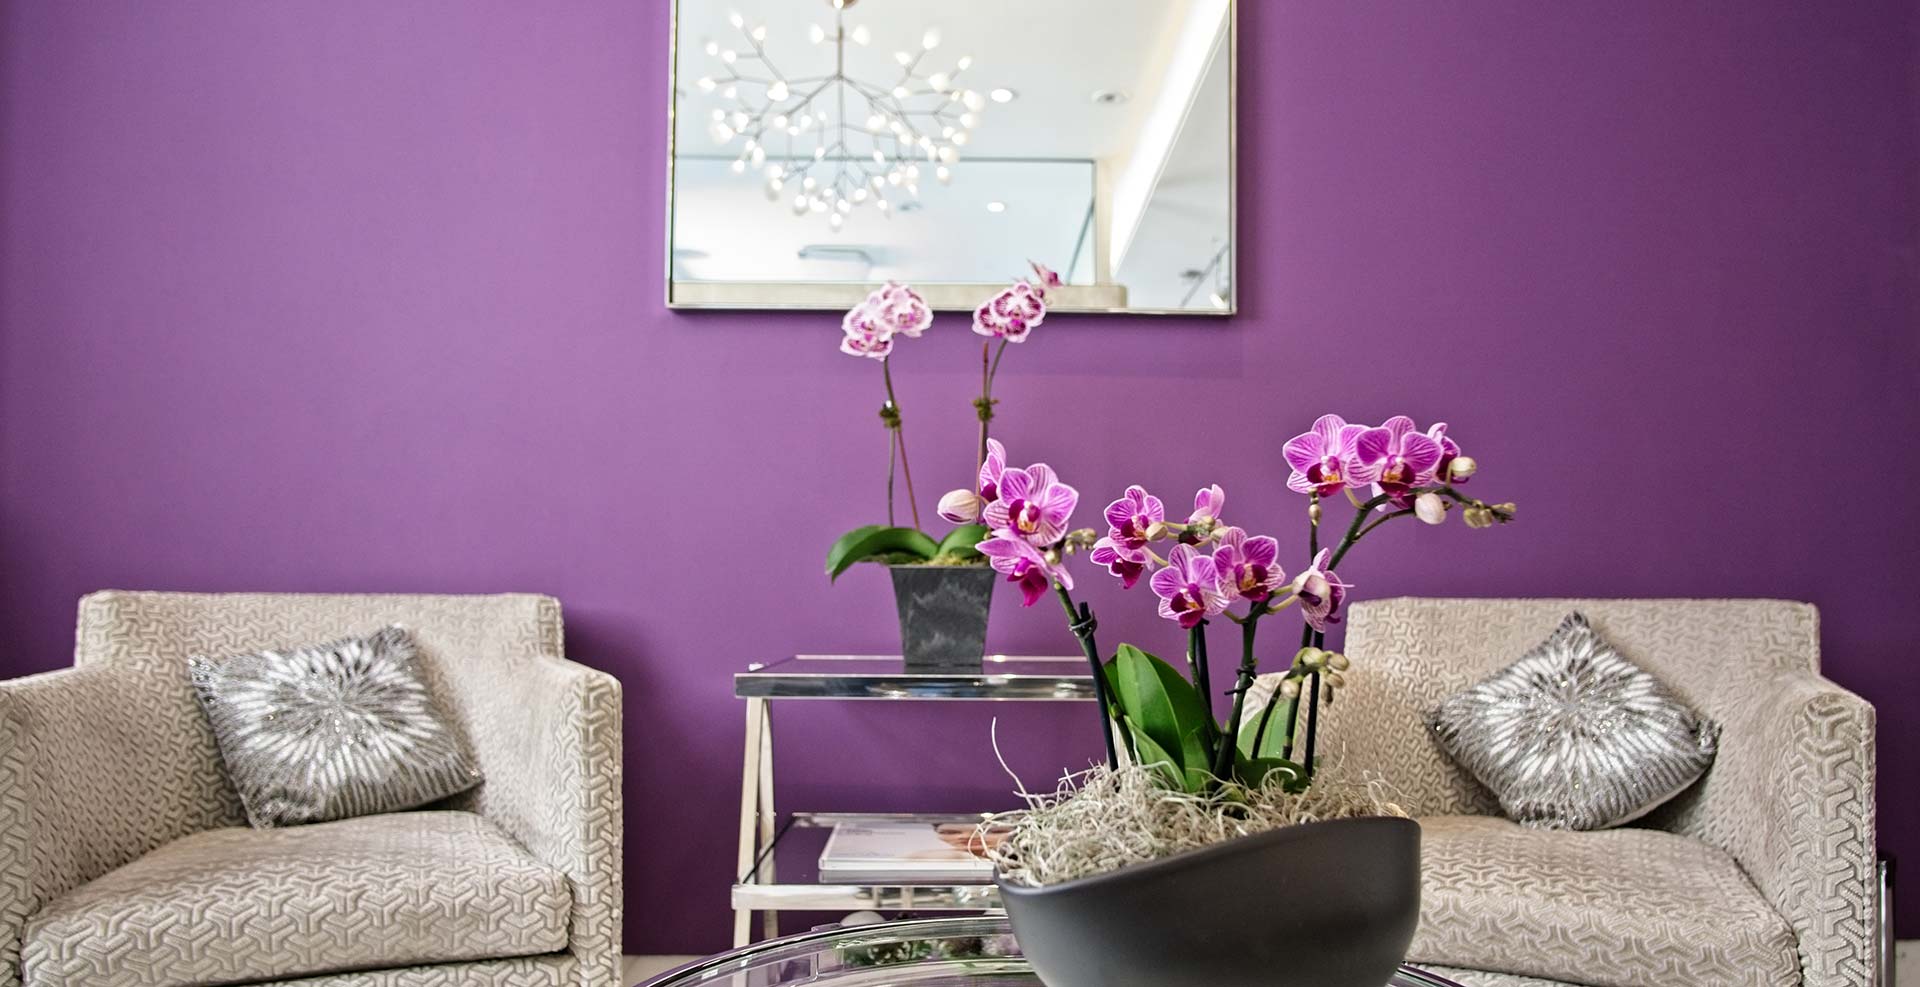 Maurice M. Khosh, MD, FACS office lobby. Purple walls, mirror, an orchid on a beautiful table.